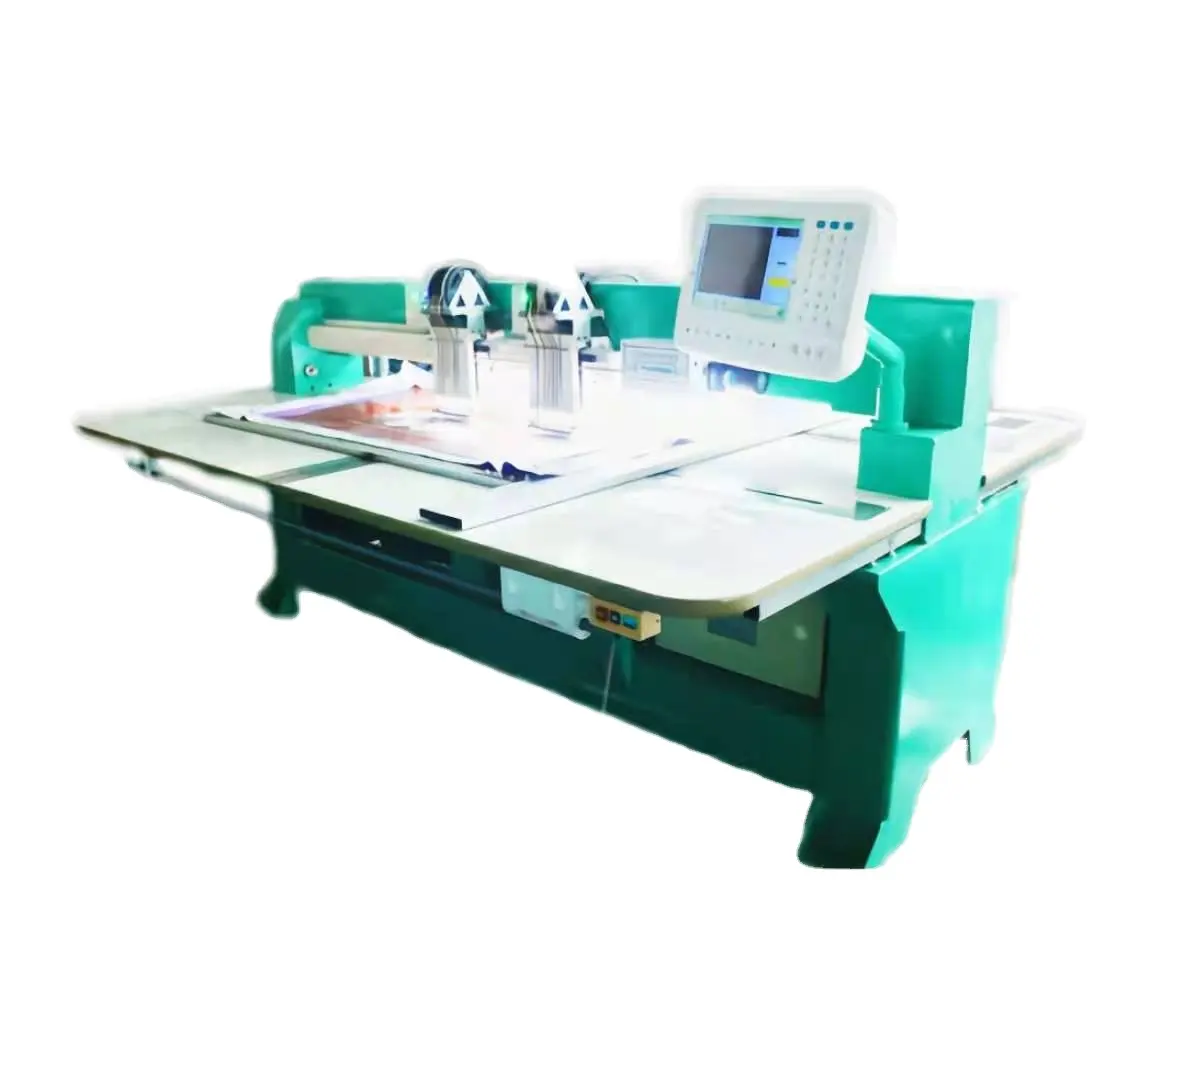 New Professional Design Computer 2 Heads Punching Embroidery Panel Pressing Embroidery Machine For Sale